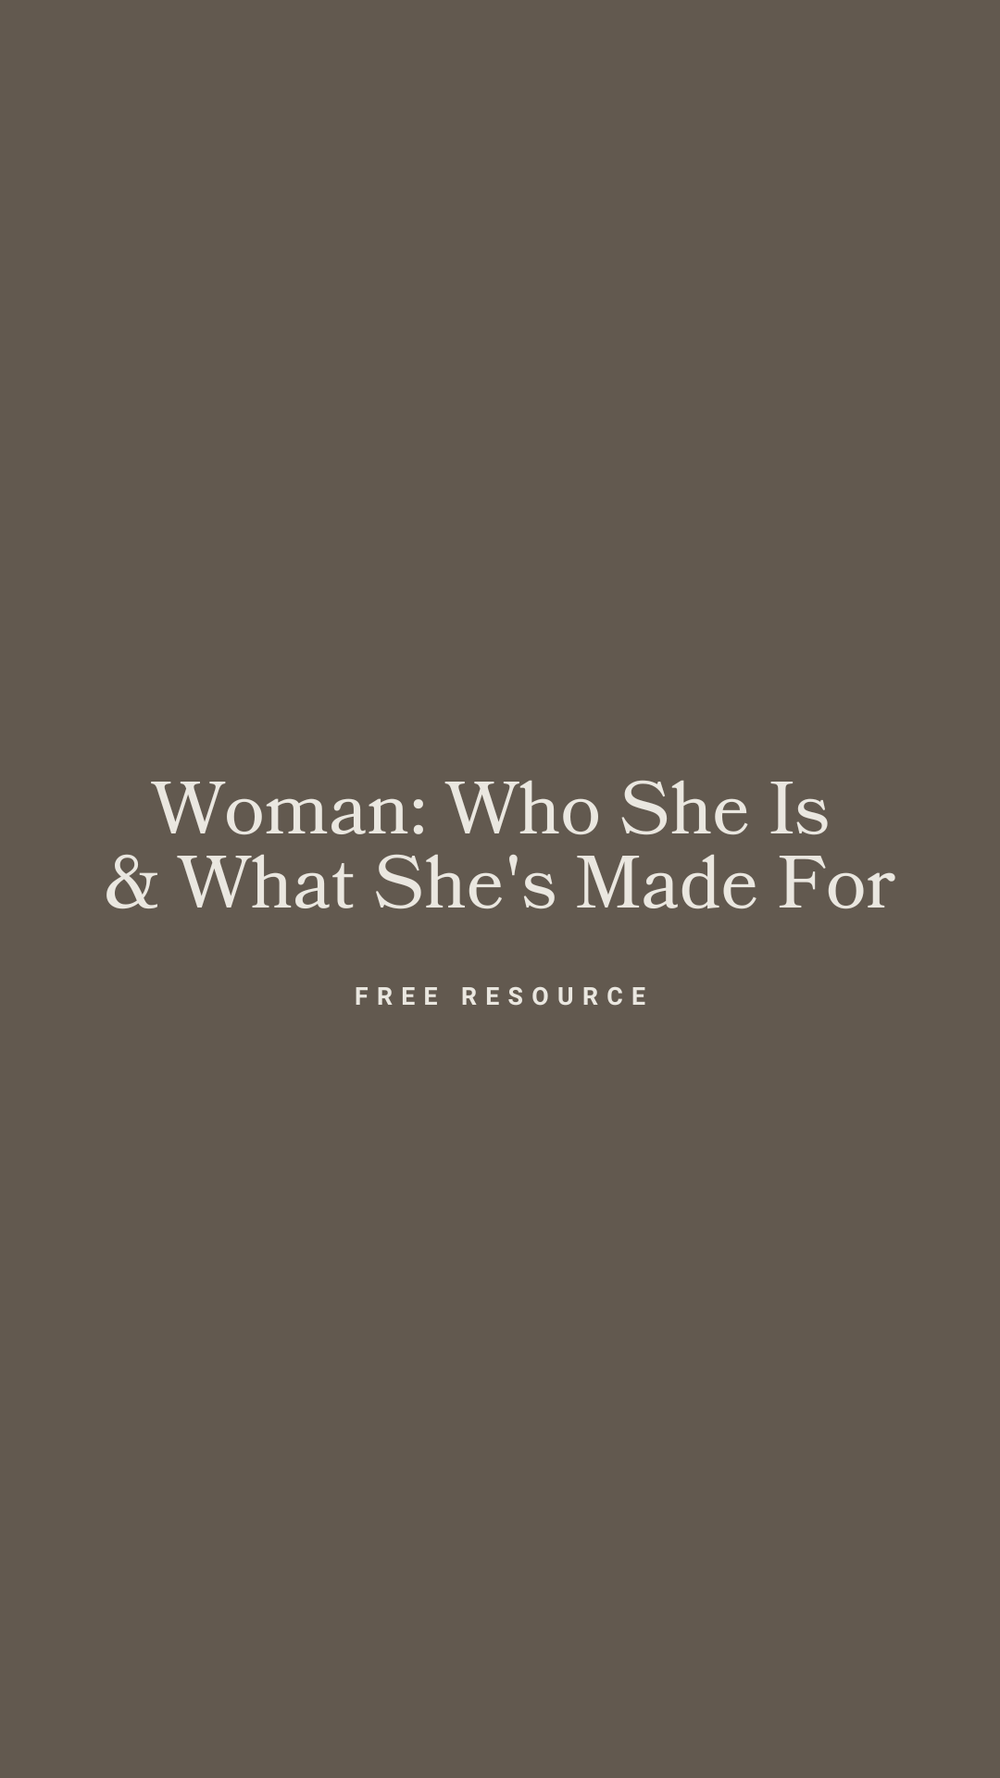 Woman: Who She Is & What She's Made For